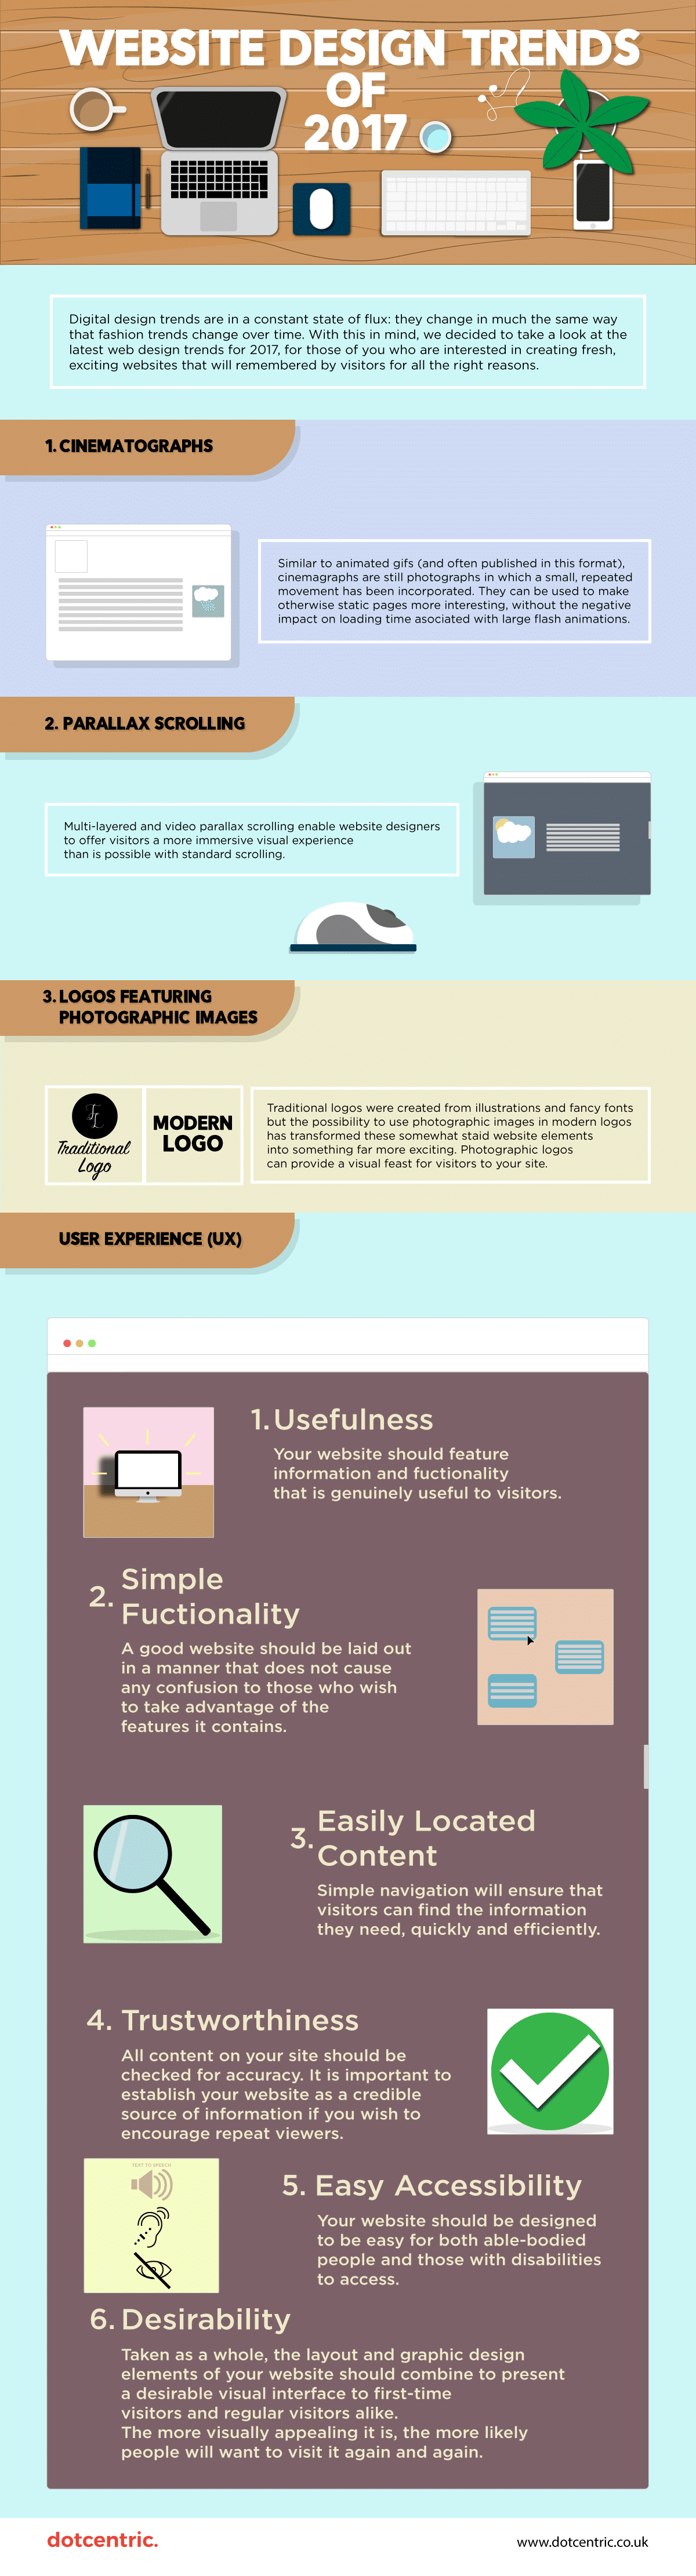 Design Trends Of 2017 Infographic